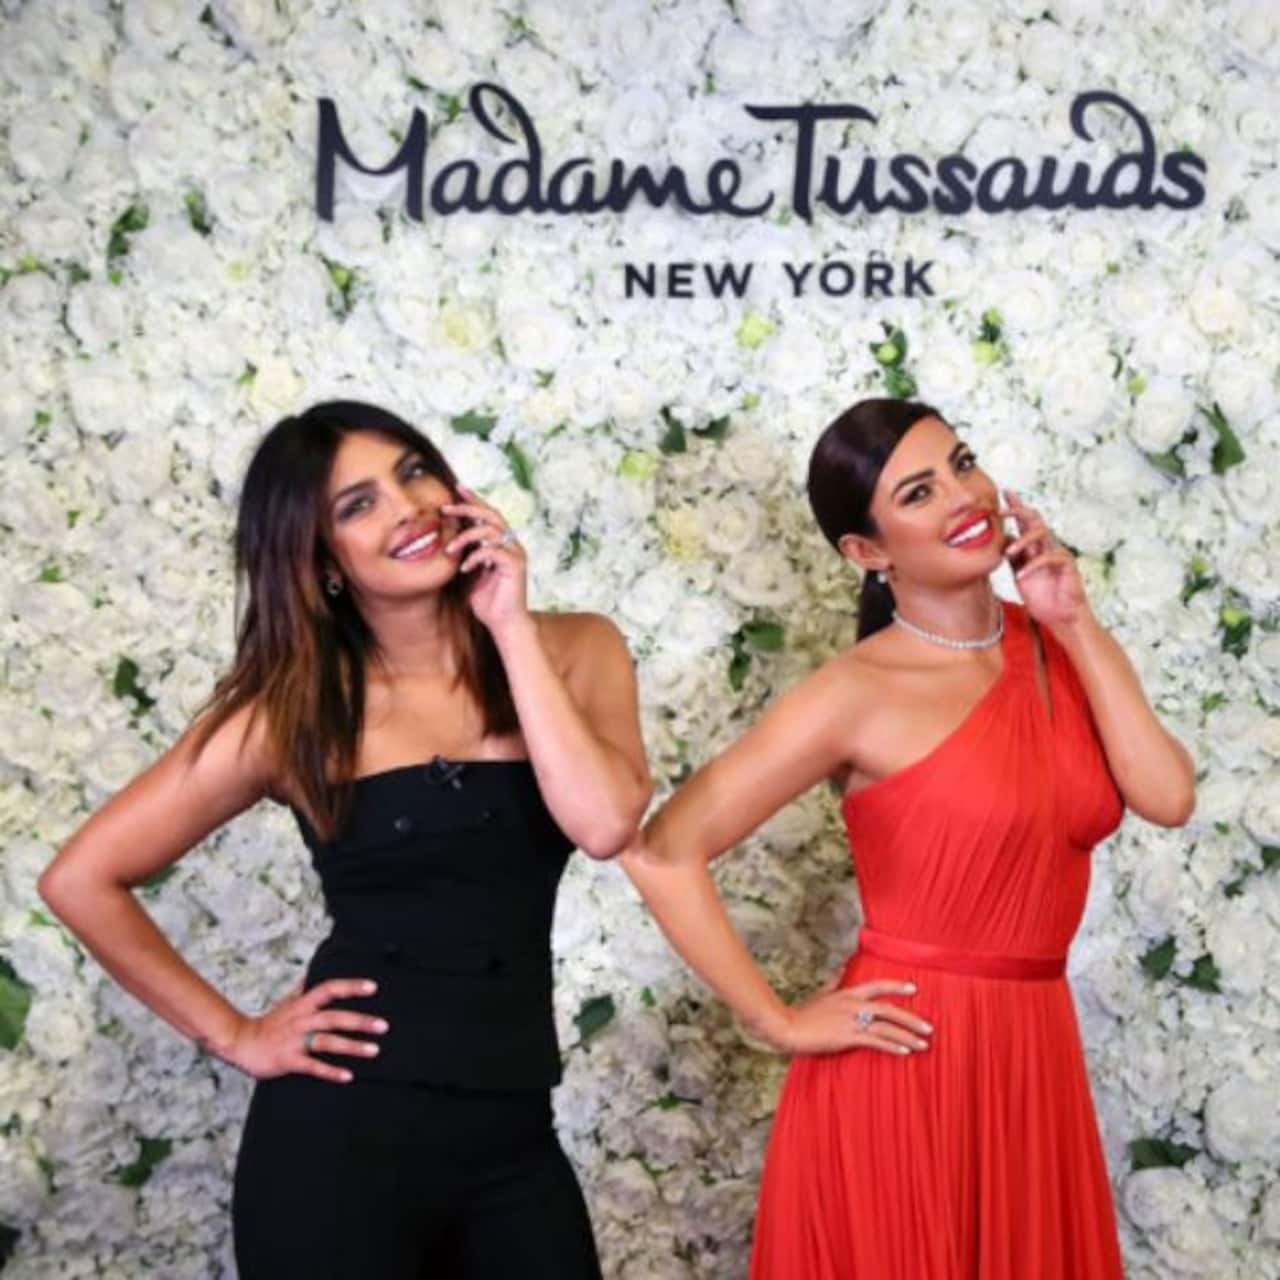 Priyanka Chopra gets her wax statue at the Madame Tussauds and our excitement has no bounds